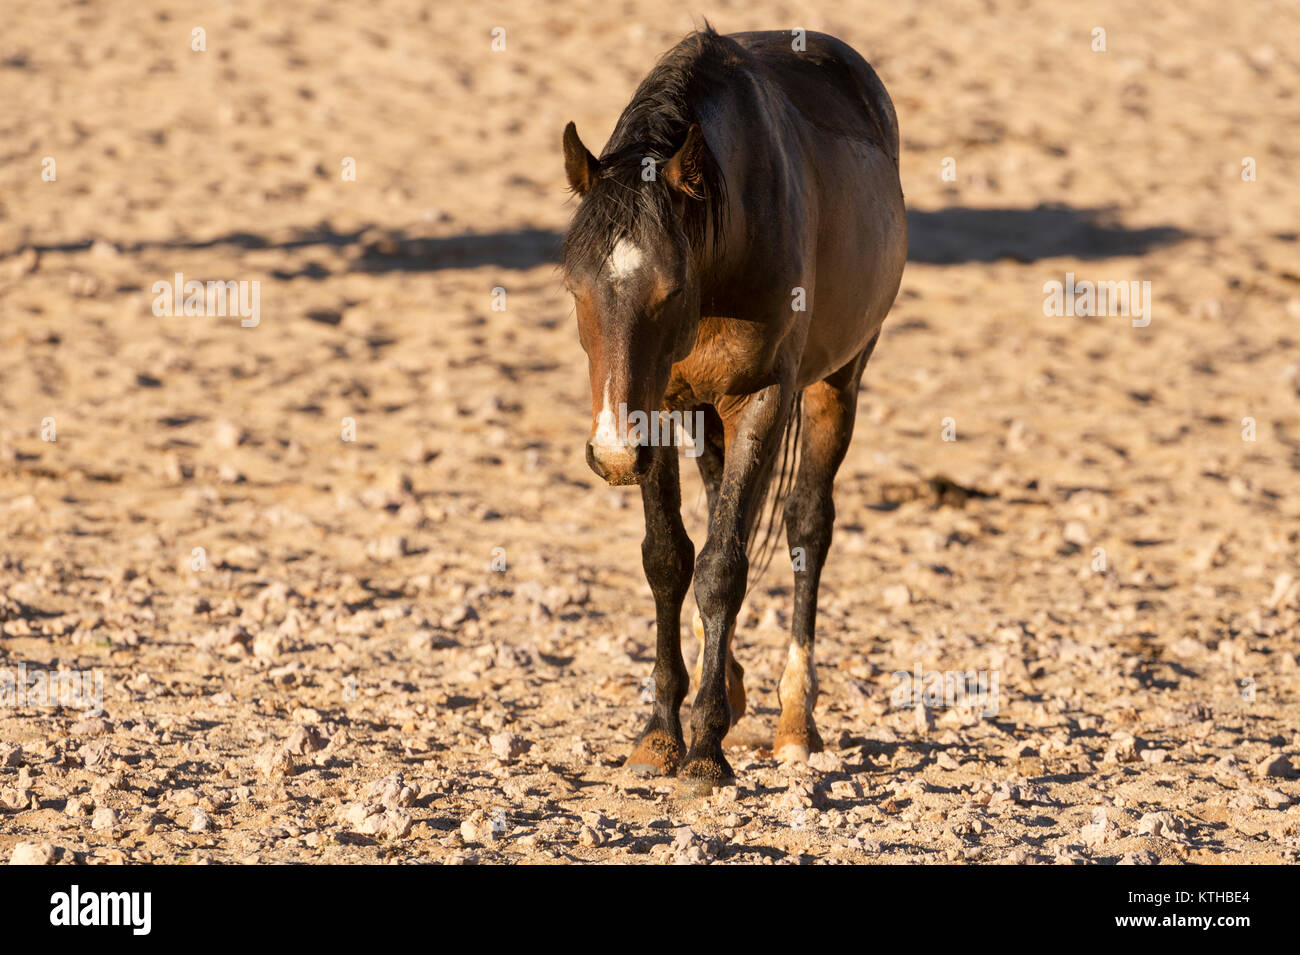 Wild horses of the Garub in Namibia; a small herd of feral horses surviving in the harsh desert around Garub where they rely on an artificial watehole Stock Photo